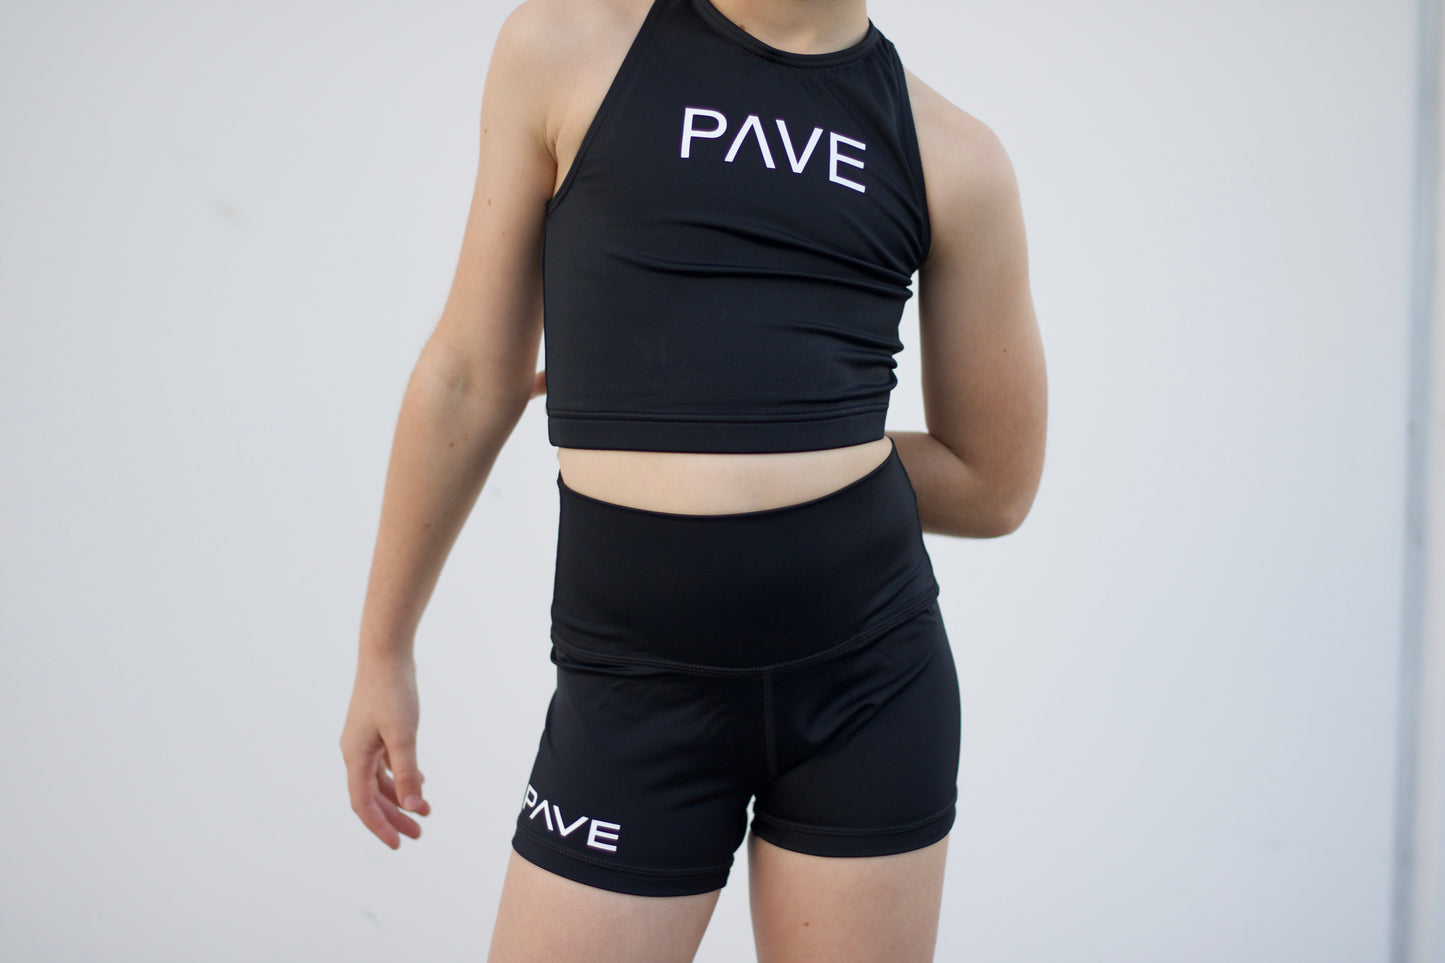 PAVE Rookie/Newbie Booty Shorts